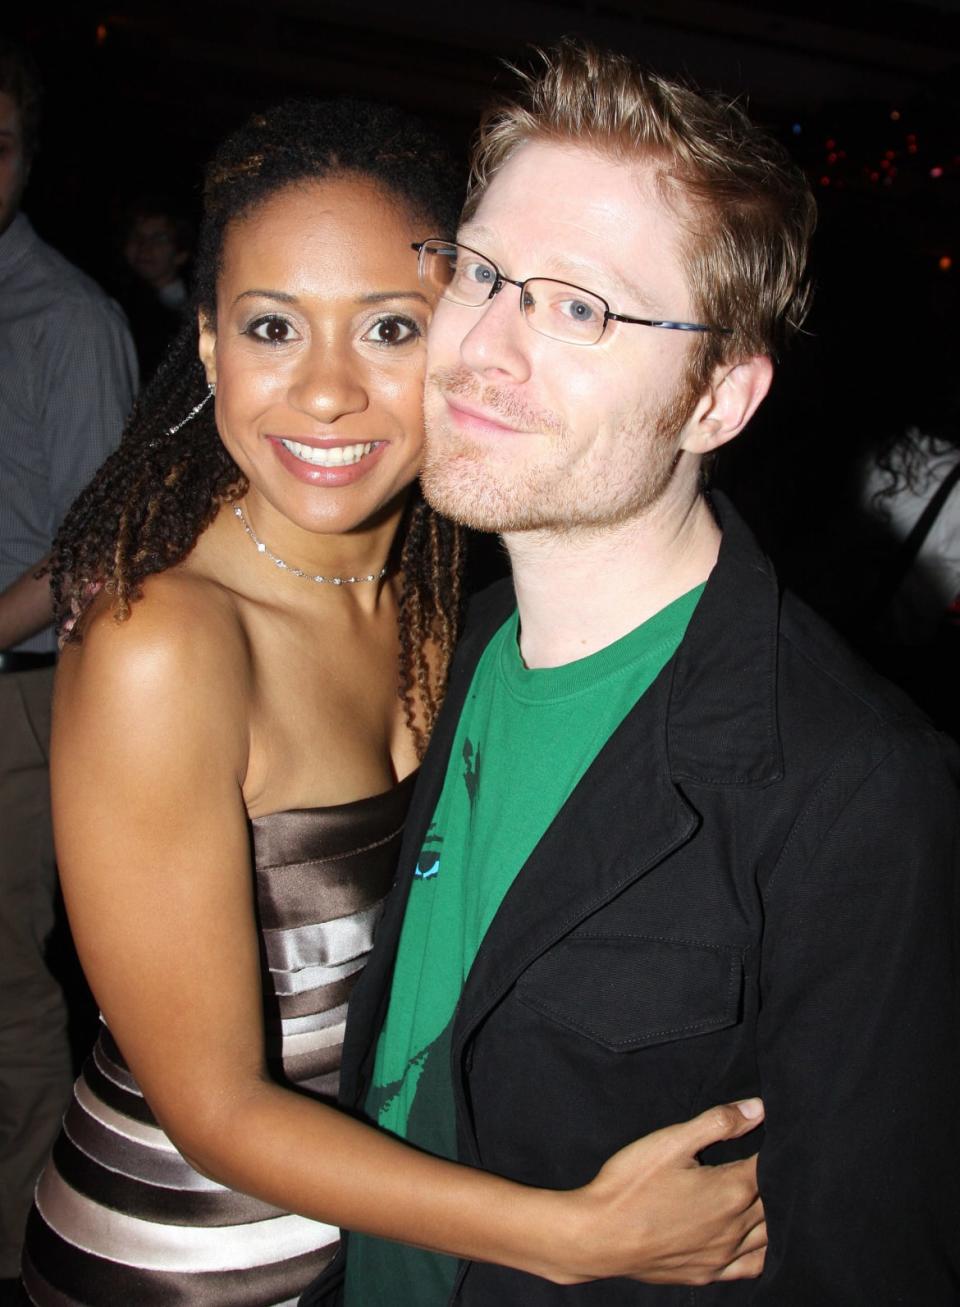 <div class="inline-image__caption"><p>Tracie Thoms (who played Joanne in the film and the final cast) and Anthony Rapp (who was the original and film Mark) pose at The RENT Closing Night on Broadway After Party in 2008.</p></div> <div class="inline-image__credit">Bruce Glikas/Getty Images</div>